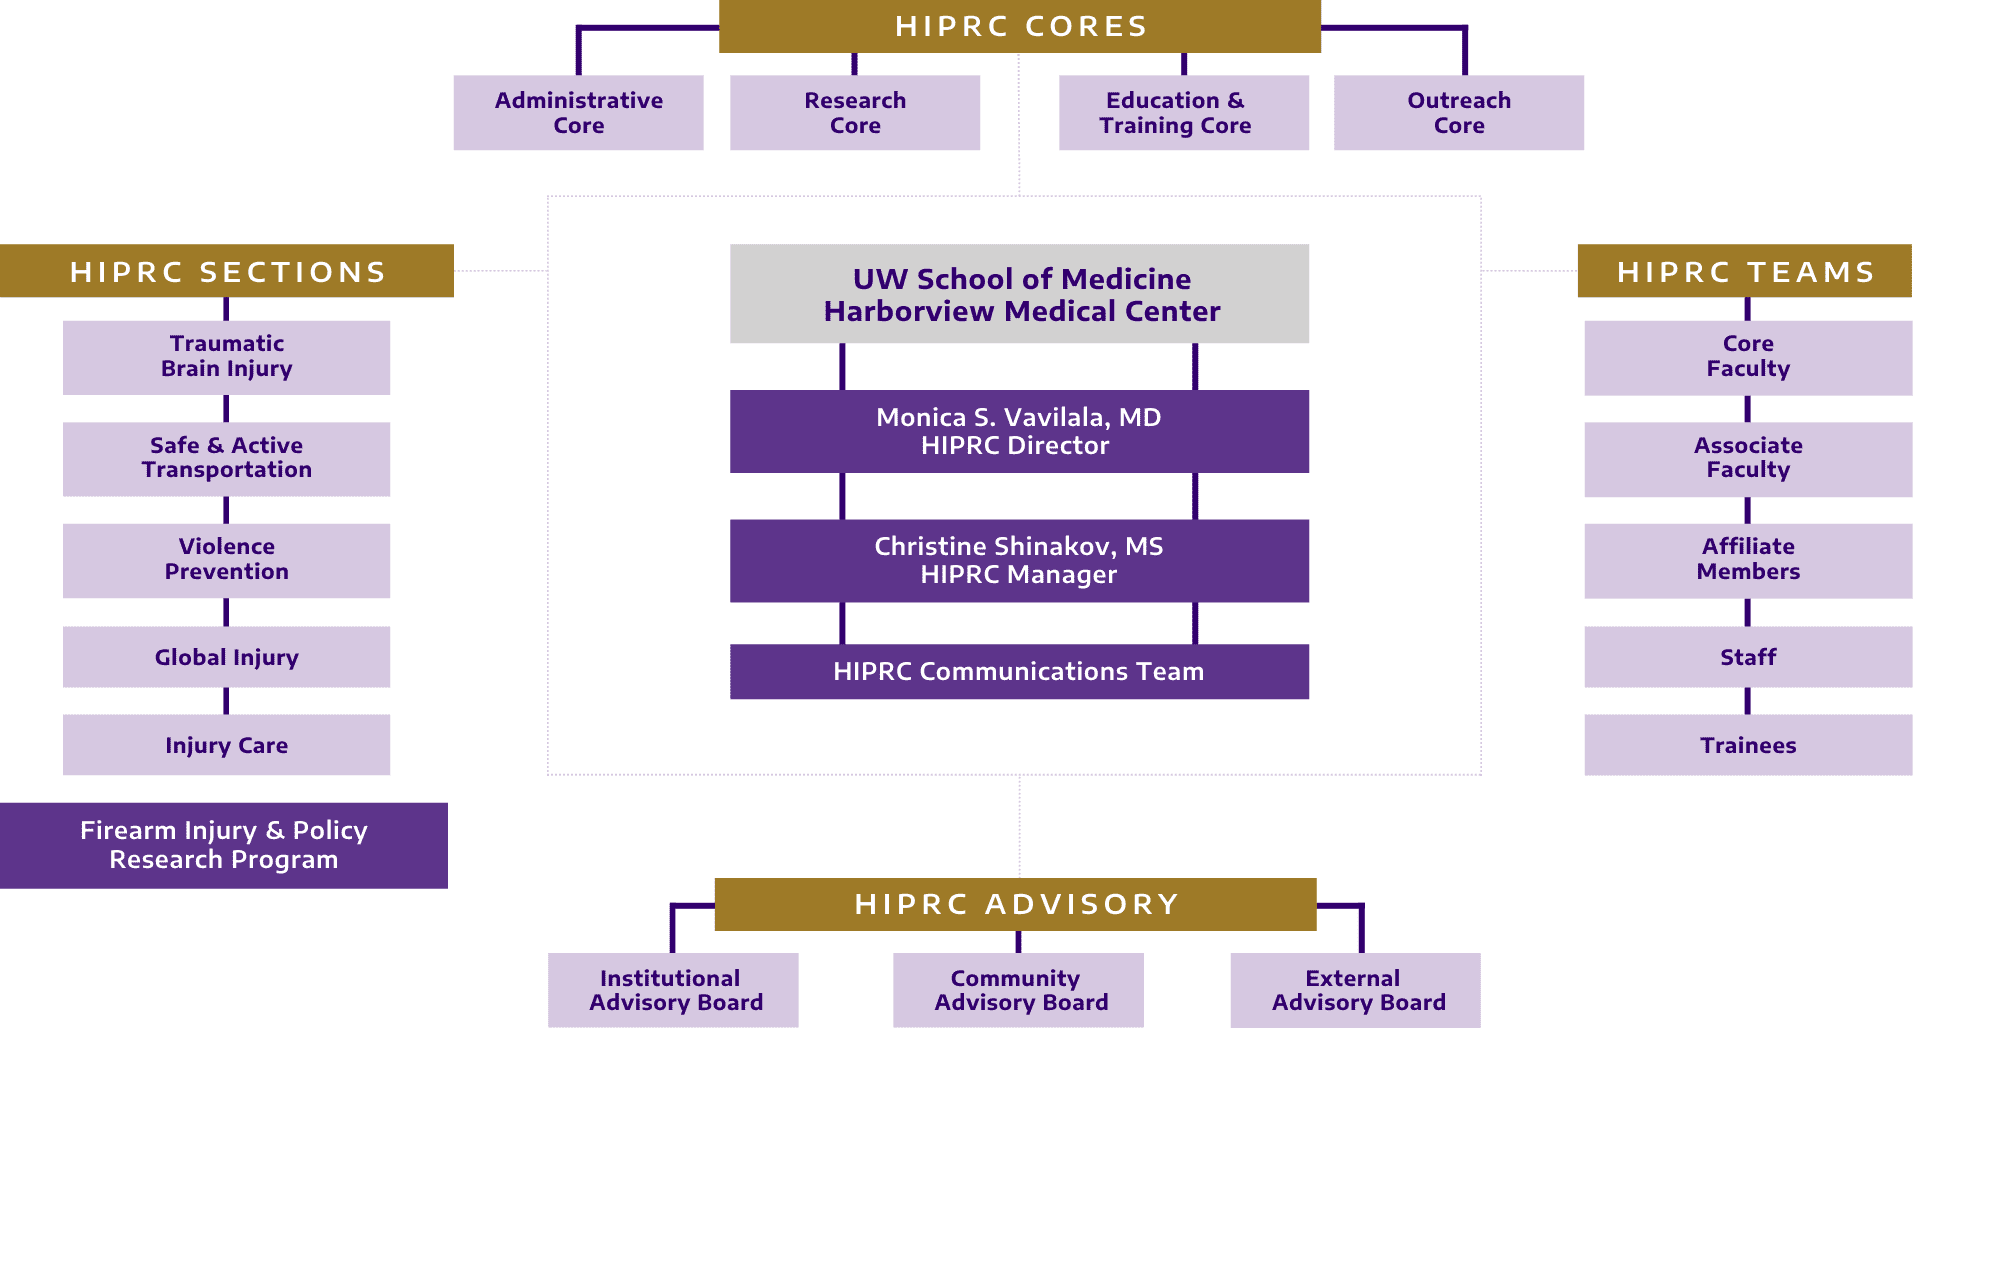 Organizational Chart of HIPRC's Structure